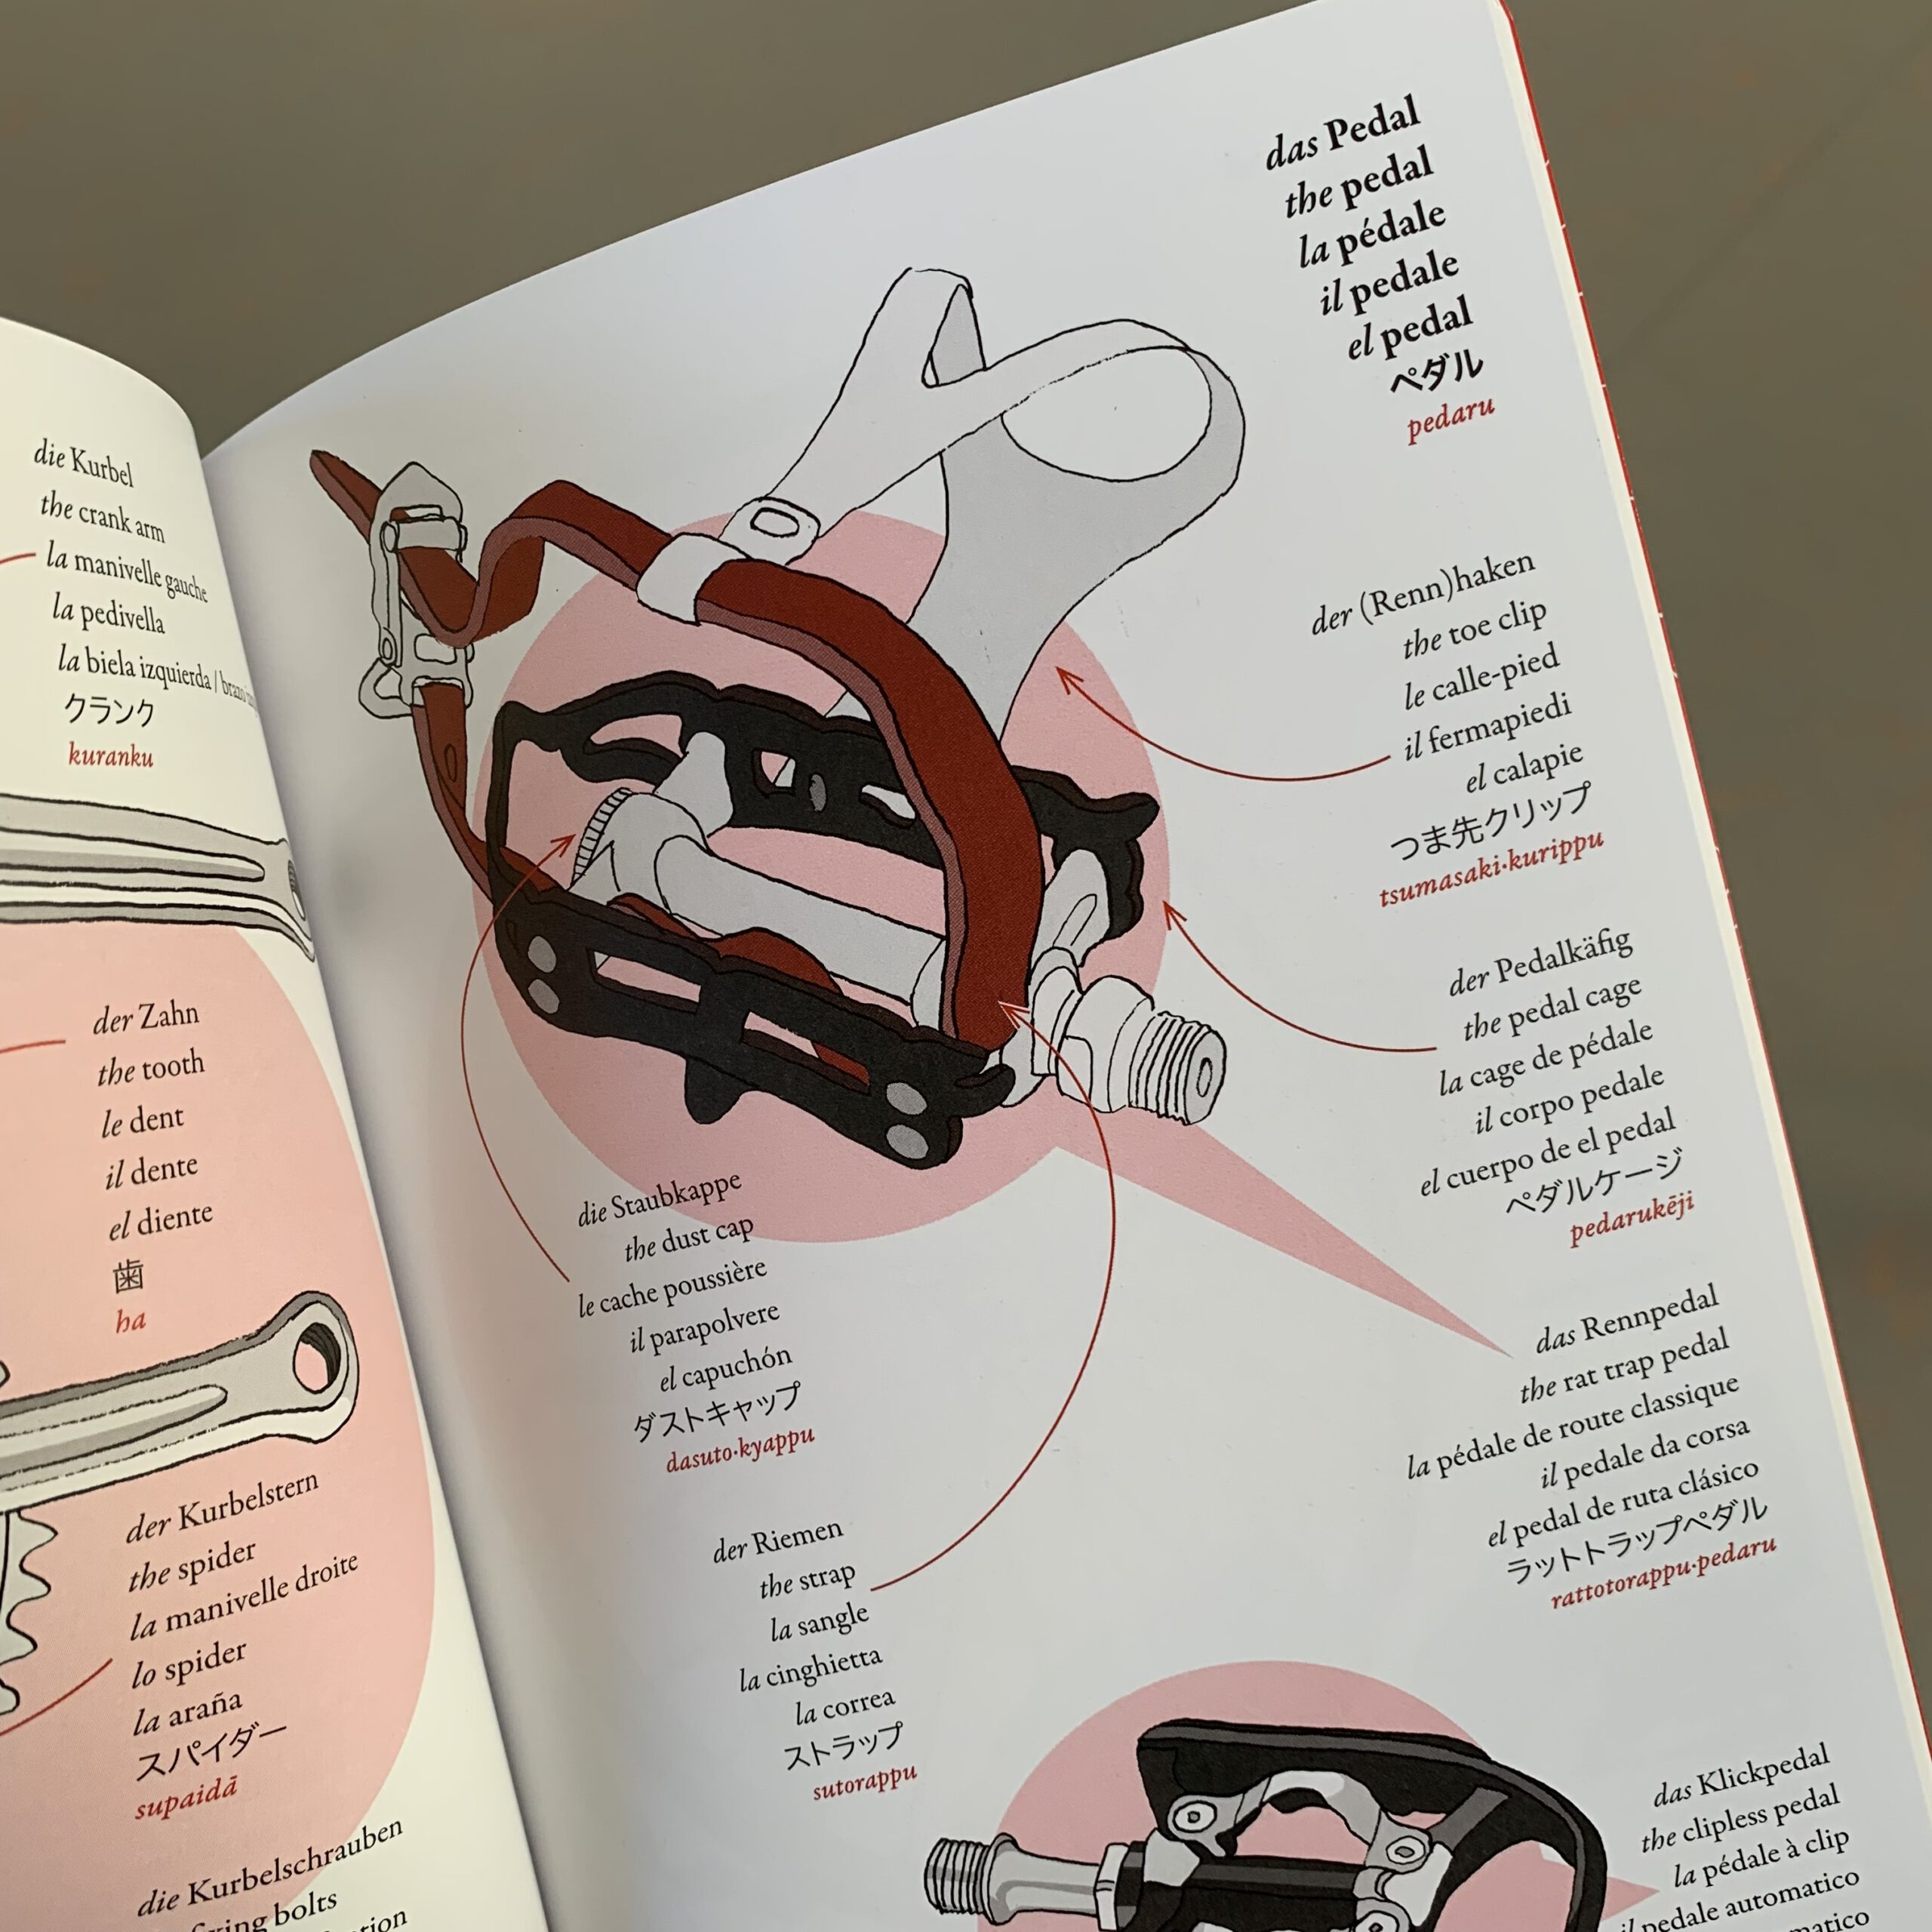 Inside bicycle dictionary